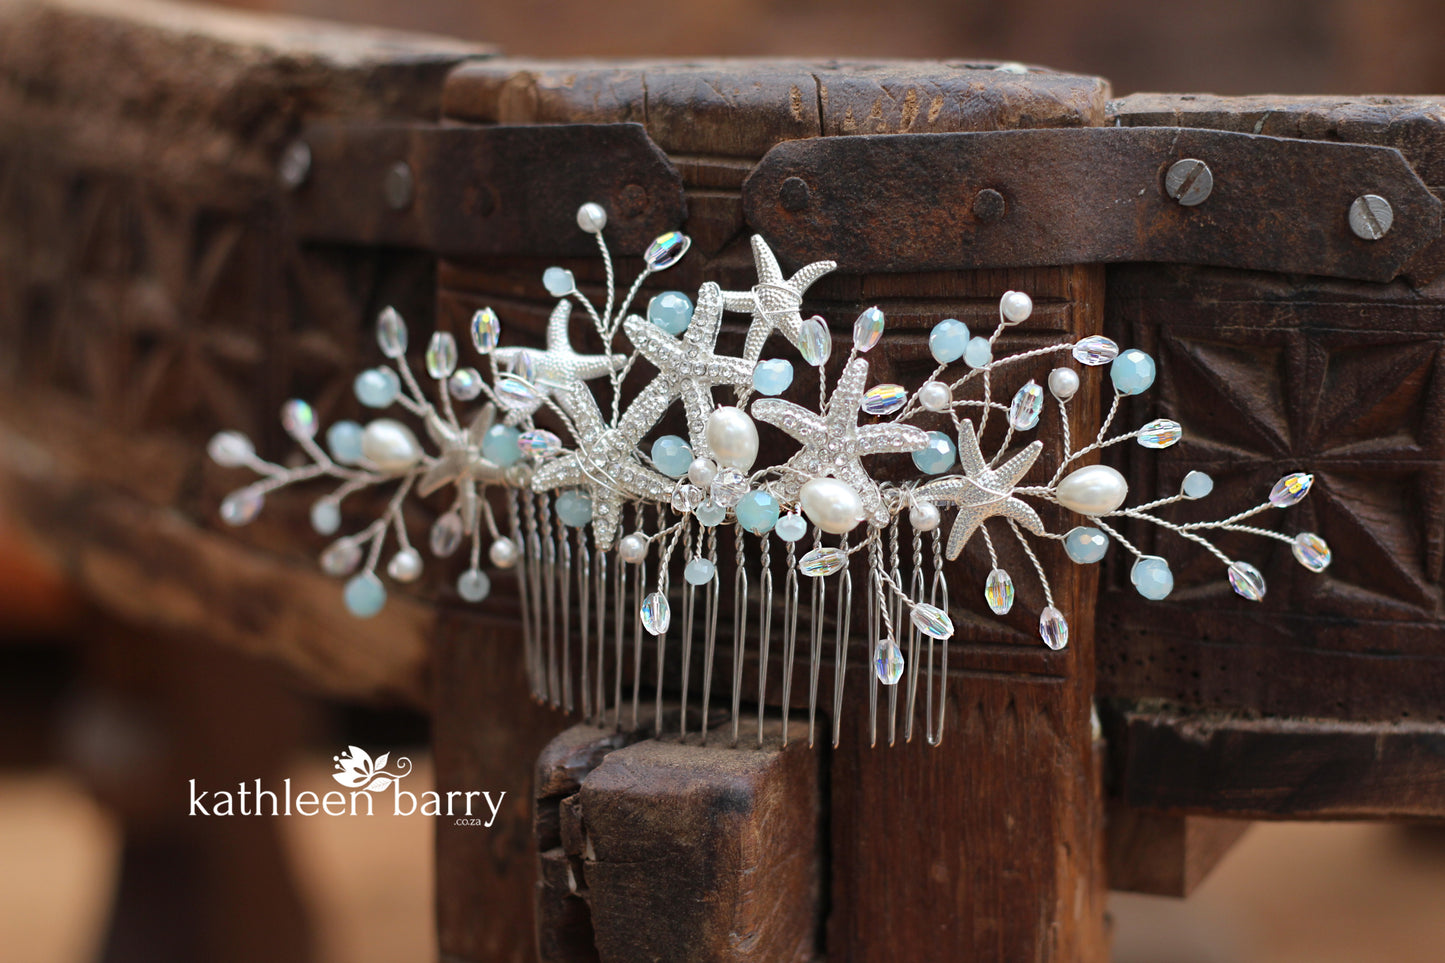 Starfish Crystal, Pearl & Rhinestone Comb - Color and finish options available